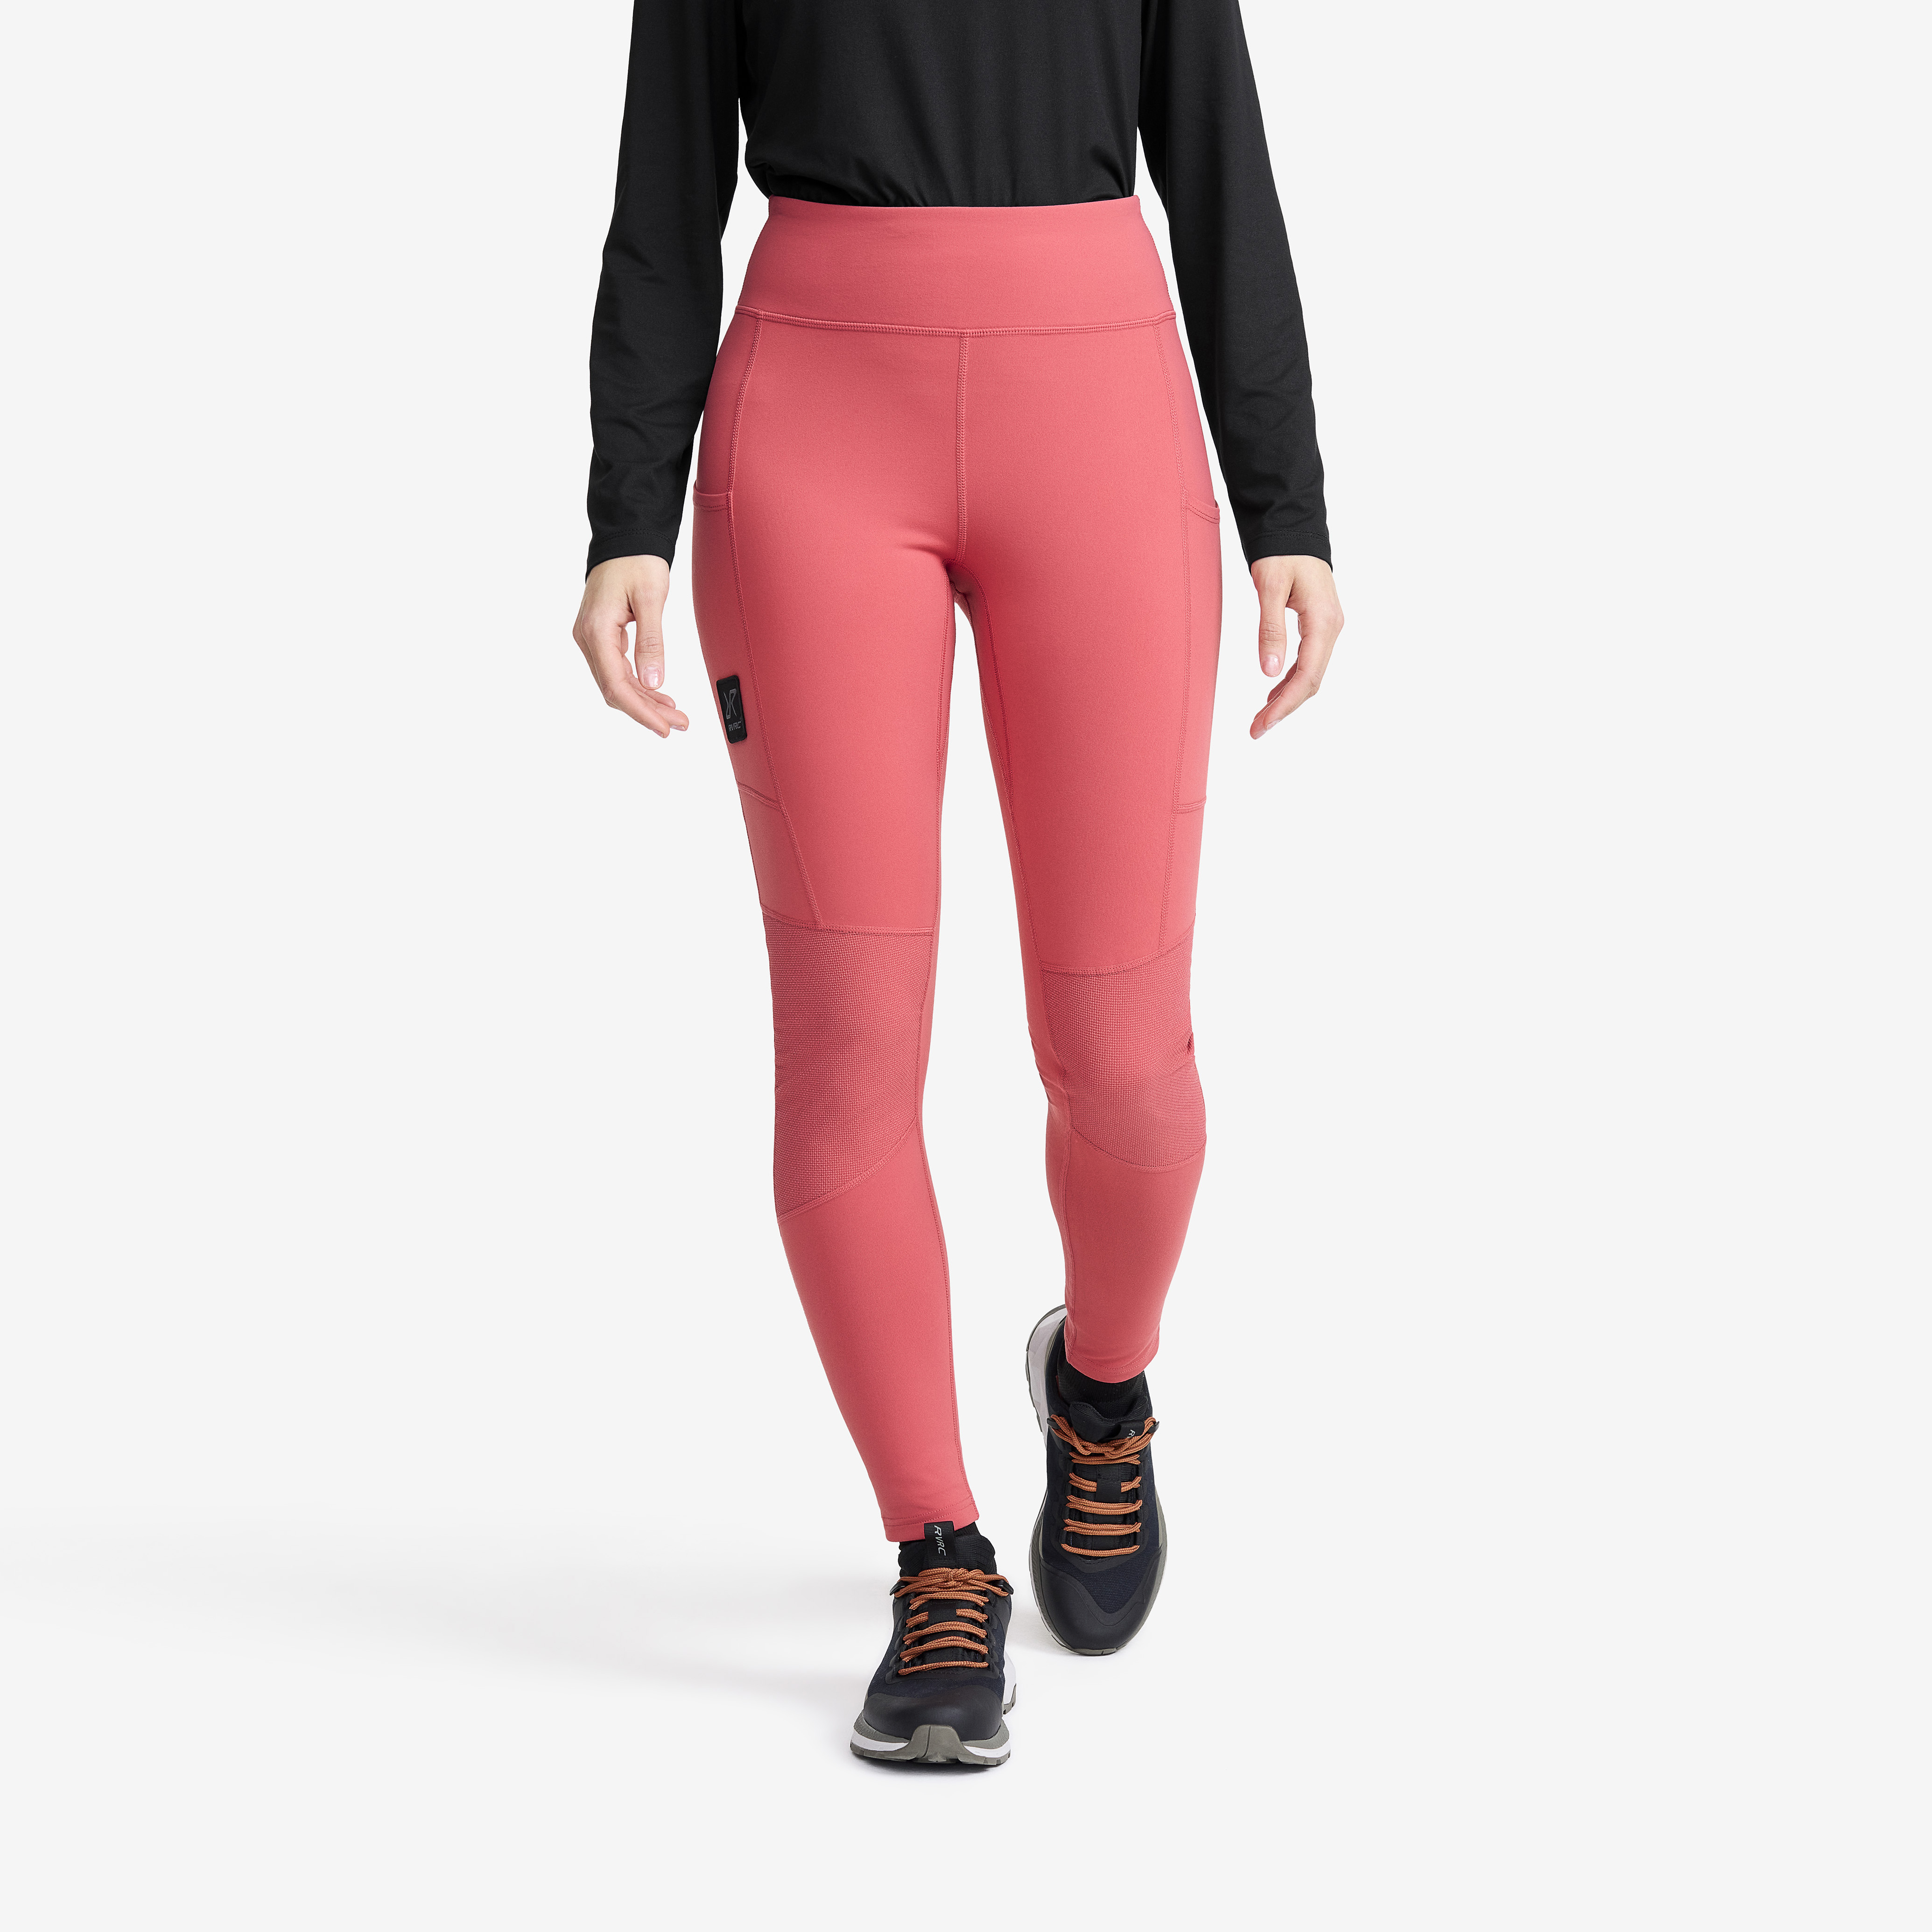 Summit Core Tights – Dam – Holly Berry Storlek:M – Outdoor Tights